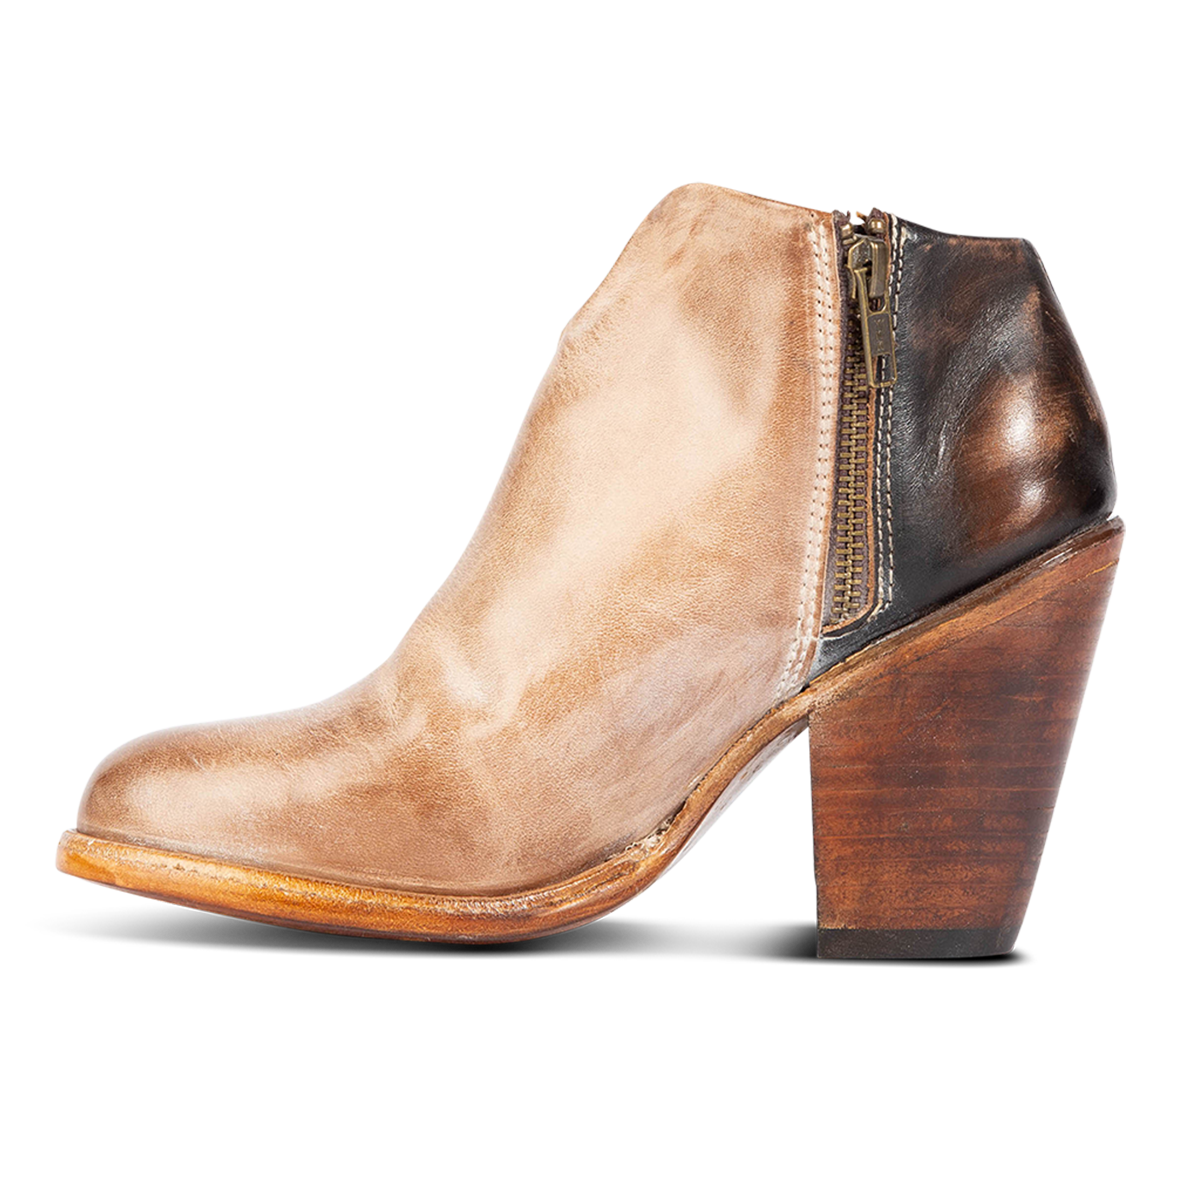 Inside view showing zip closure and two toned leather on FREEBIRD women's Detroit taupe bootie